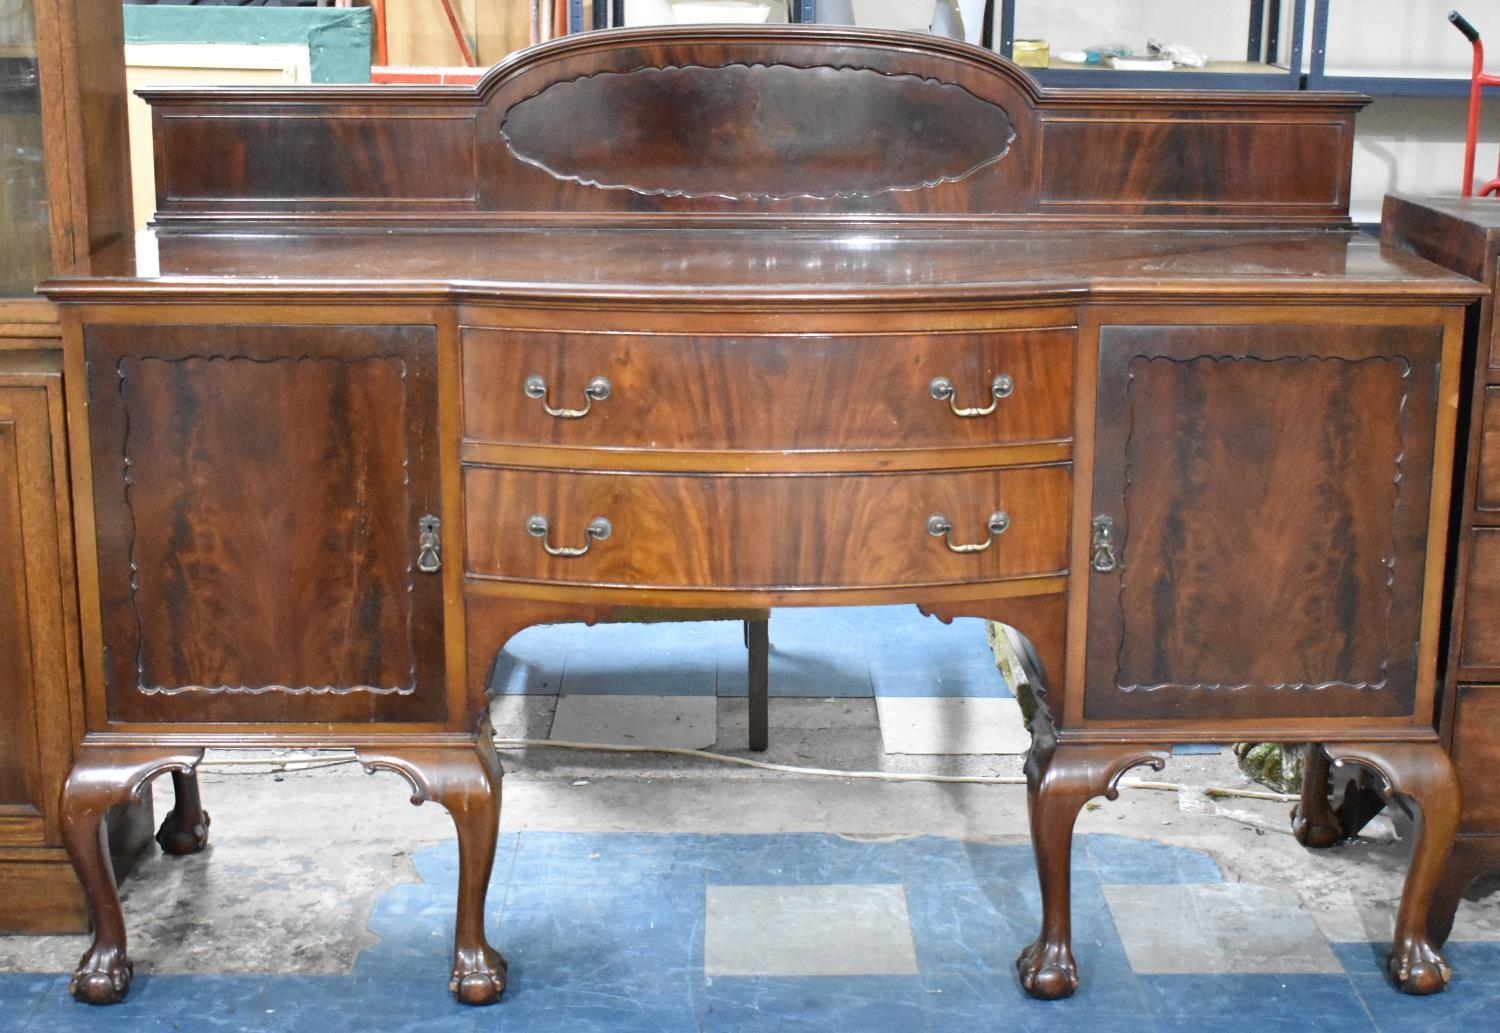 An Edwardian Mahogany Galleried Sideboard with Bowed Breakfront Having Cutlery Drawer and One Drawer